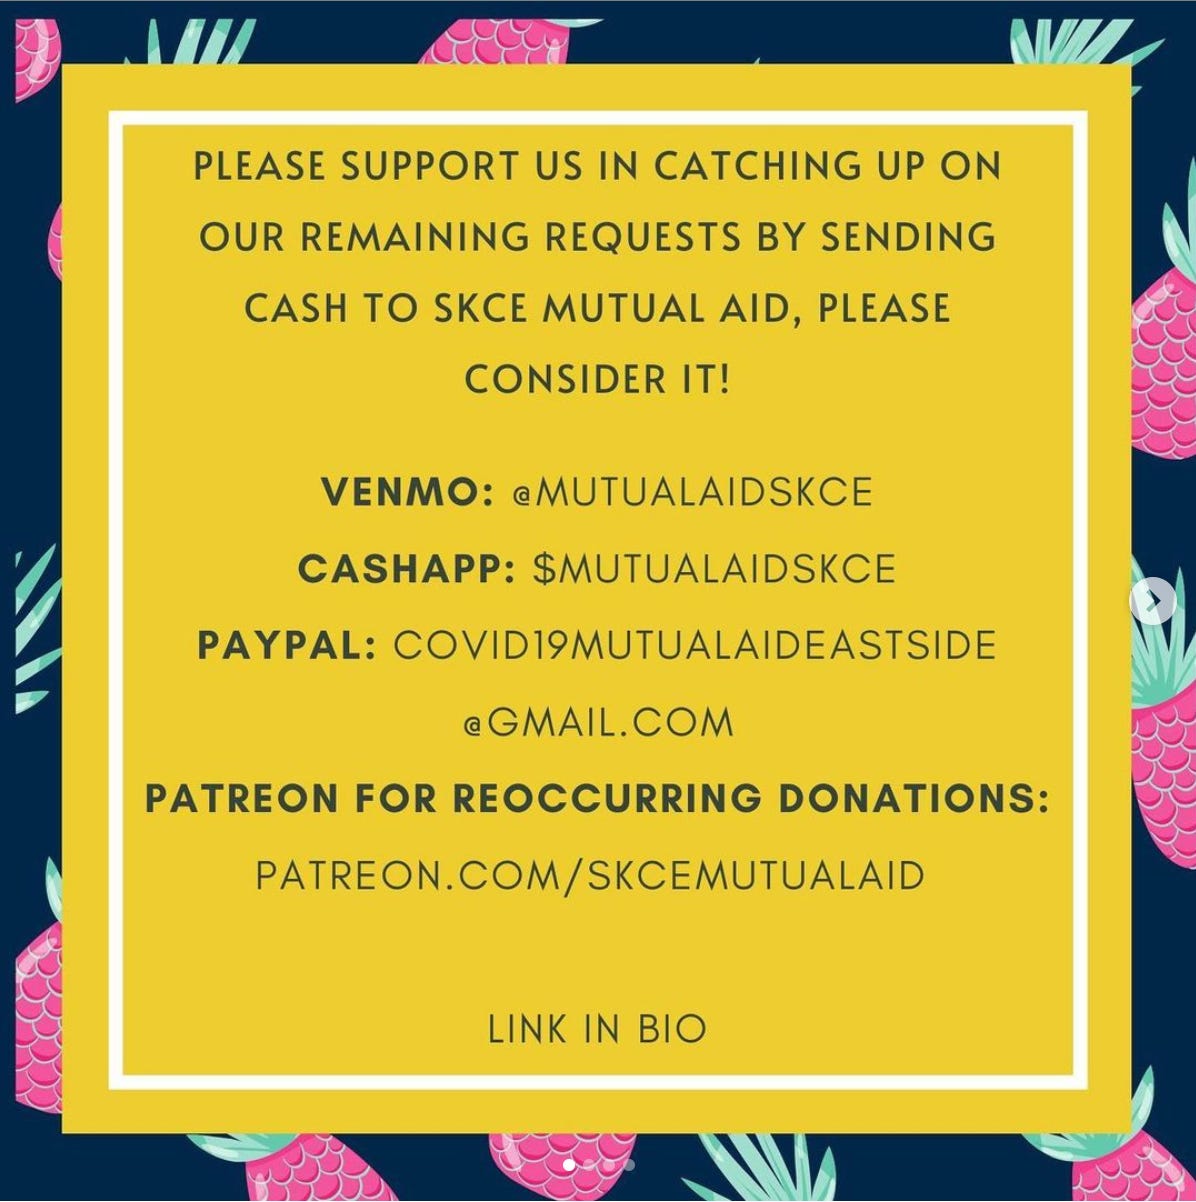 Please support us in catching up on our remaining requests by sending cash to SKCE Mutual Aid, please consider it! Venmo: @MutualAidSKCE Cashapp: $MutualAidSKCE Paypal: covid19mutualaideastside@gmail.com https://www.patreon.com/skcemutualaid